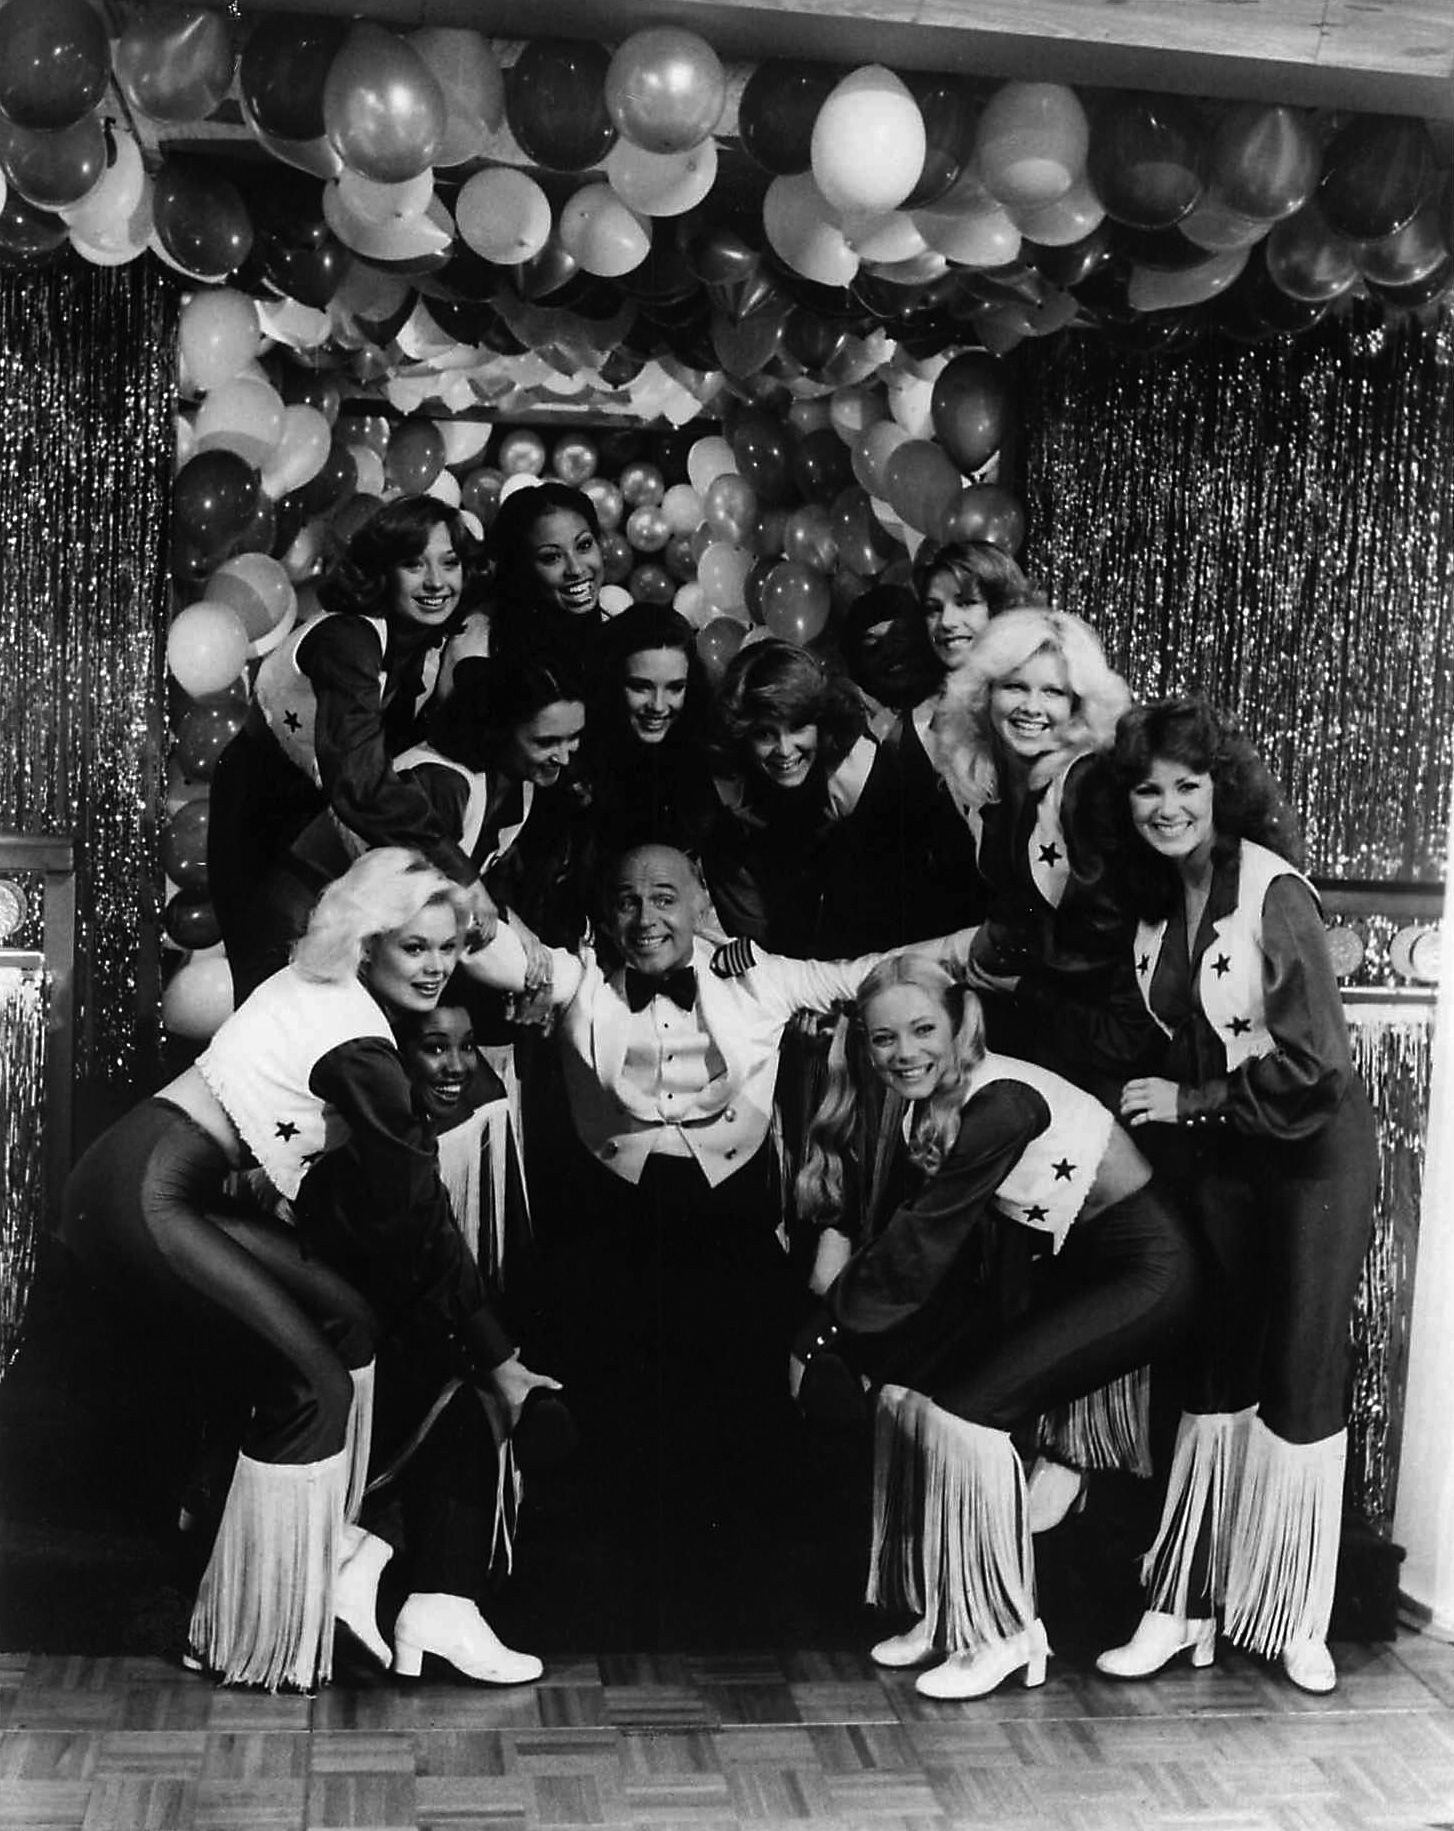 In the late 1970s, the Dallas Cowboys Cheerleaders were guest stars on ABC's hit TV show, 'The Love Boat.' At center in the photo is actor Gavin MacLeod.